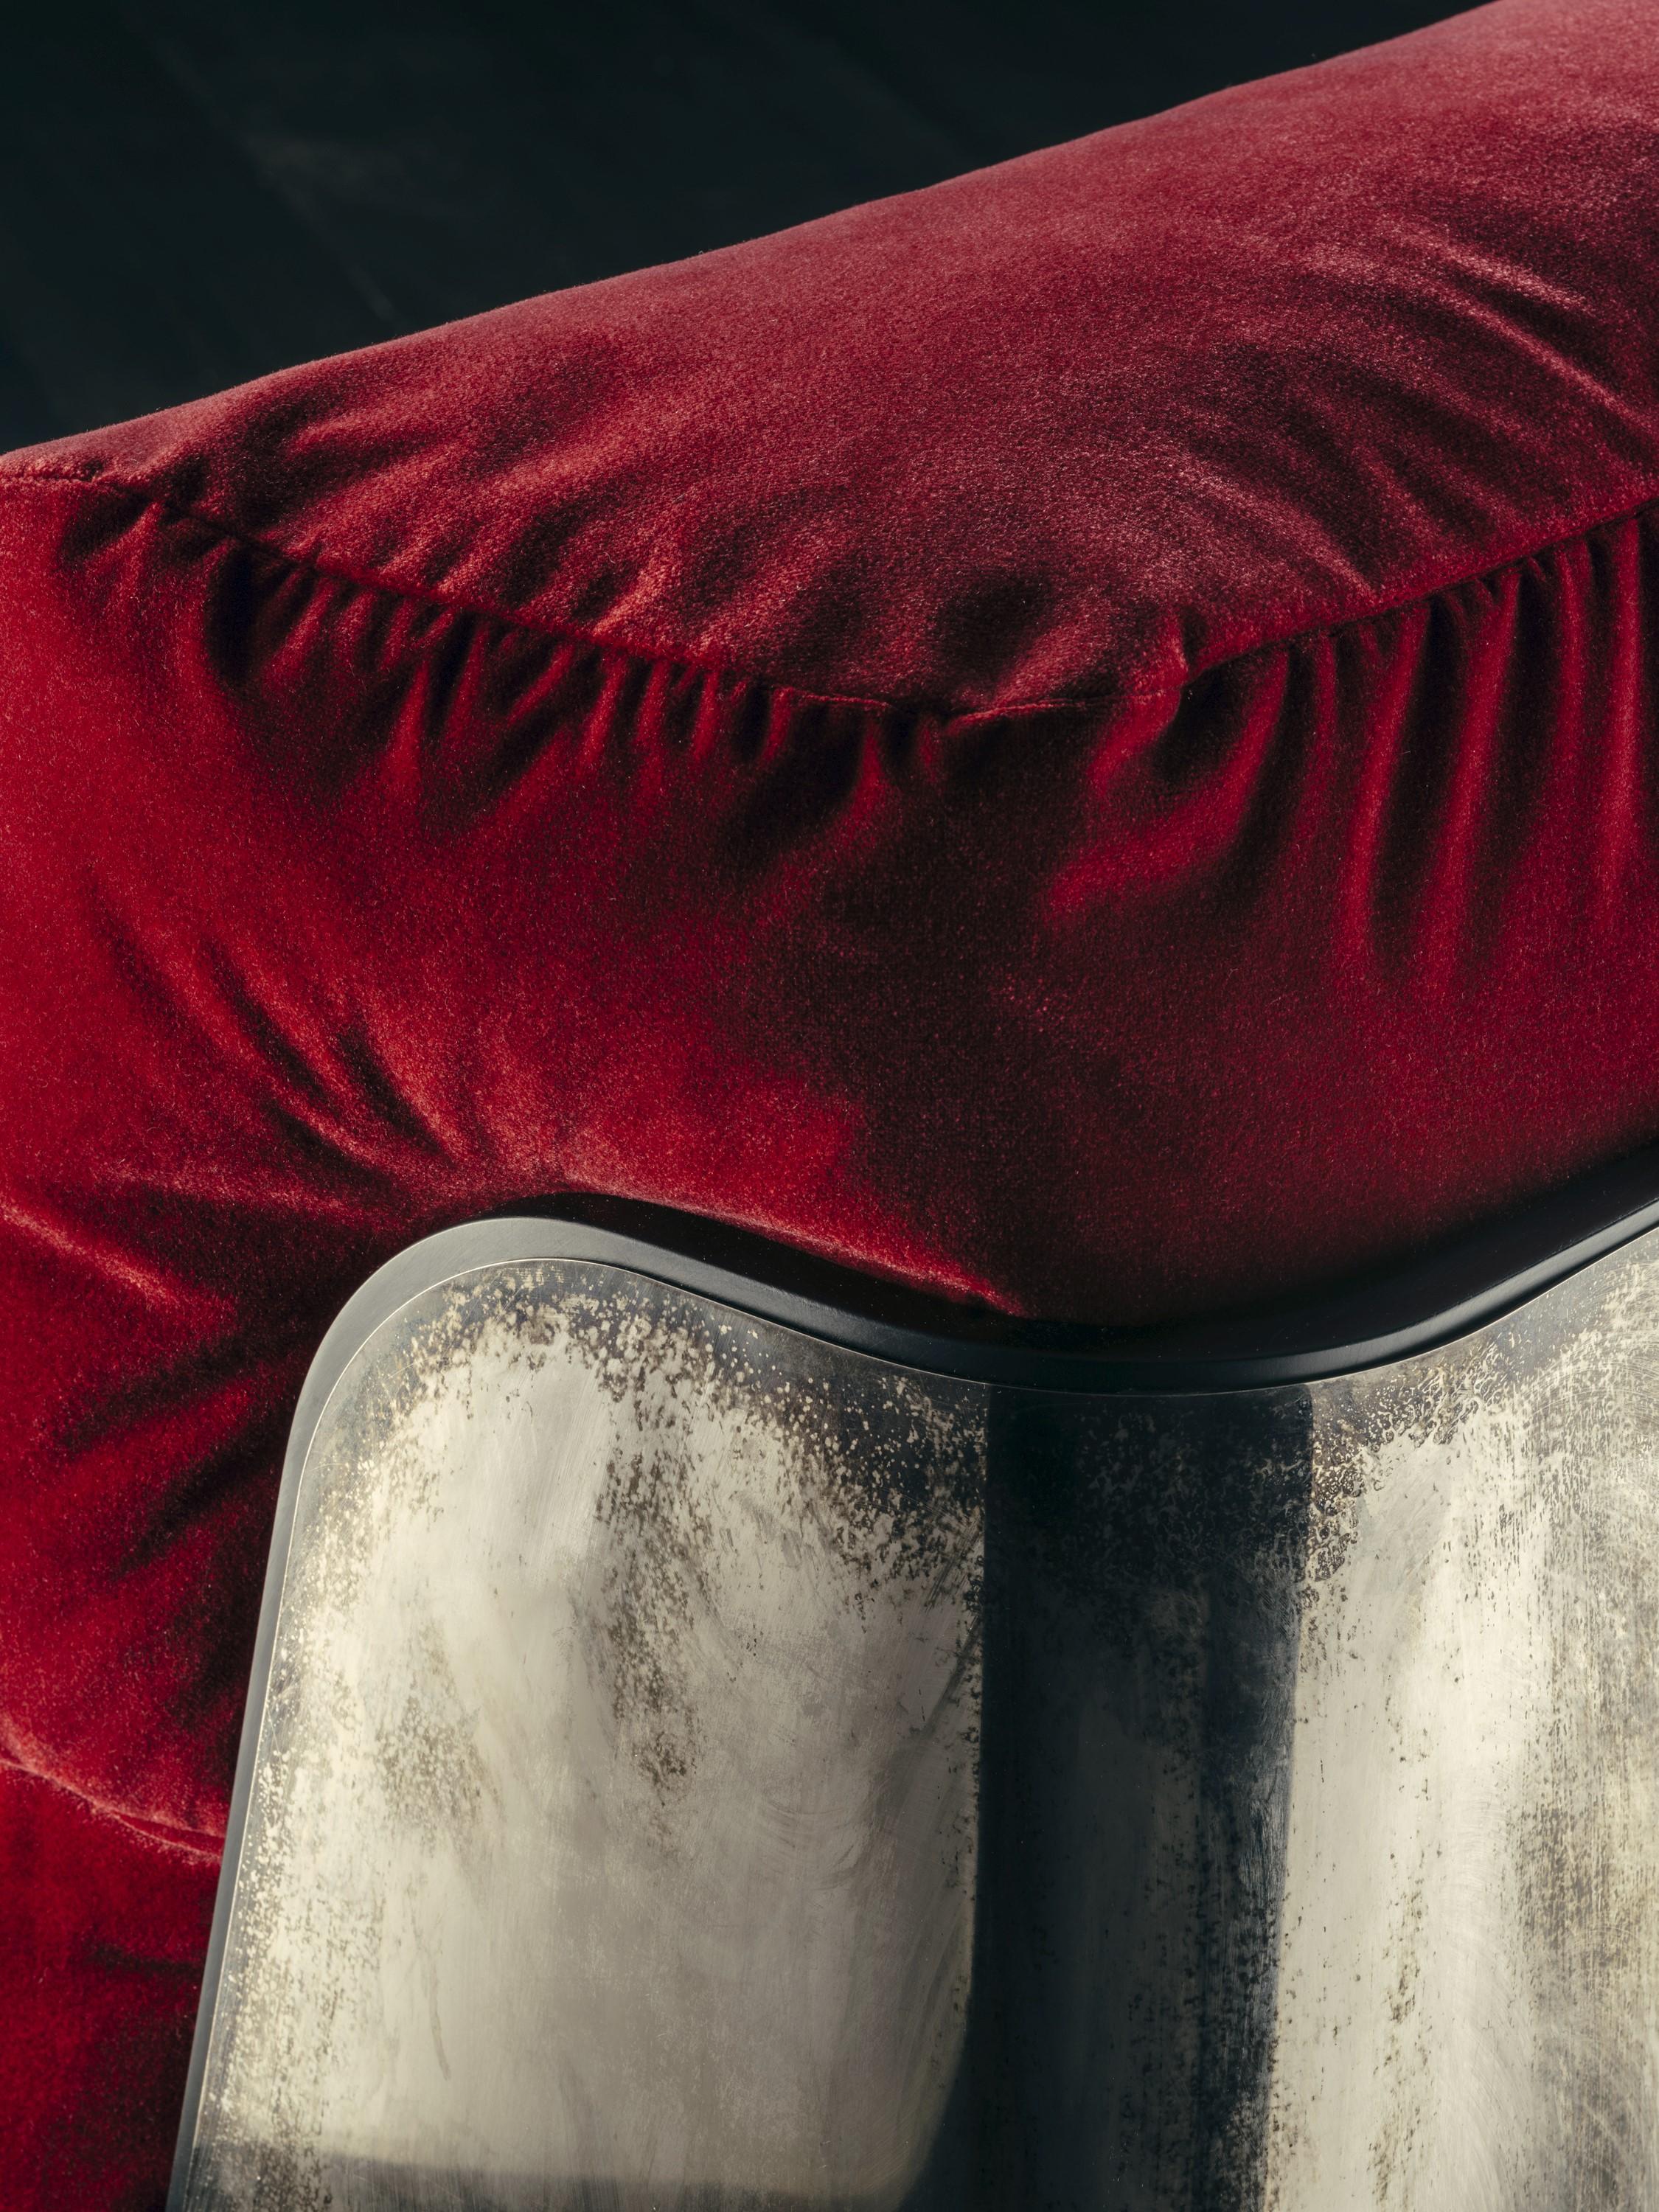 Galvanized Saint-Germain Armchair in Ruby Velvet and Antiqued Silver